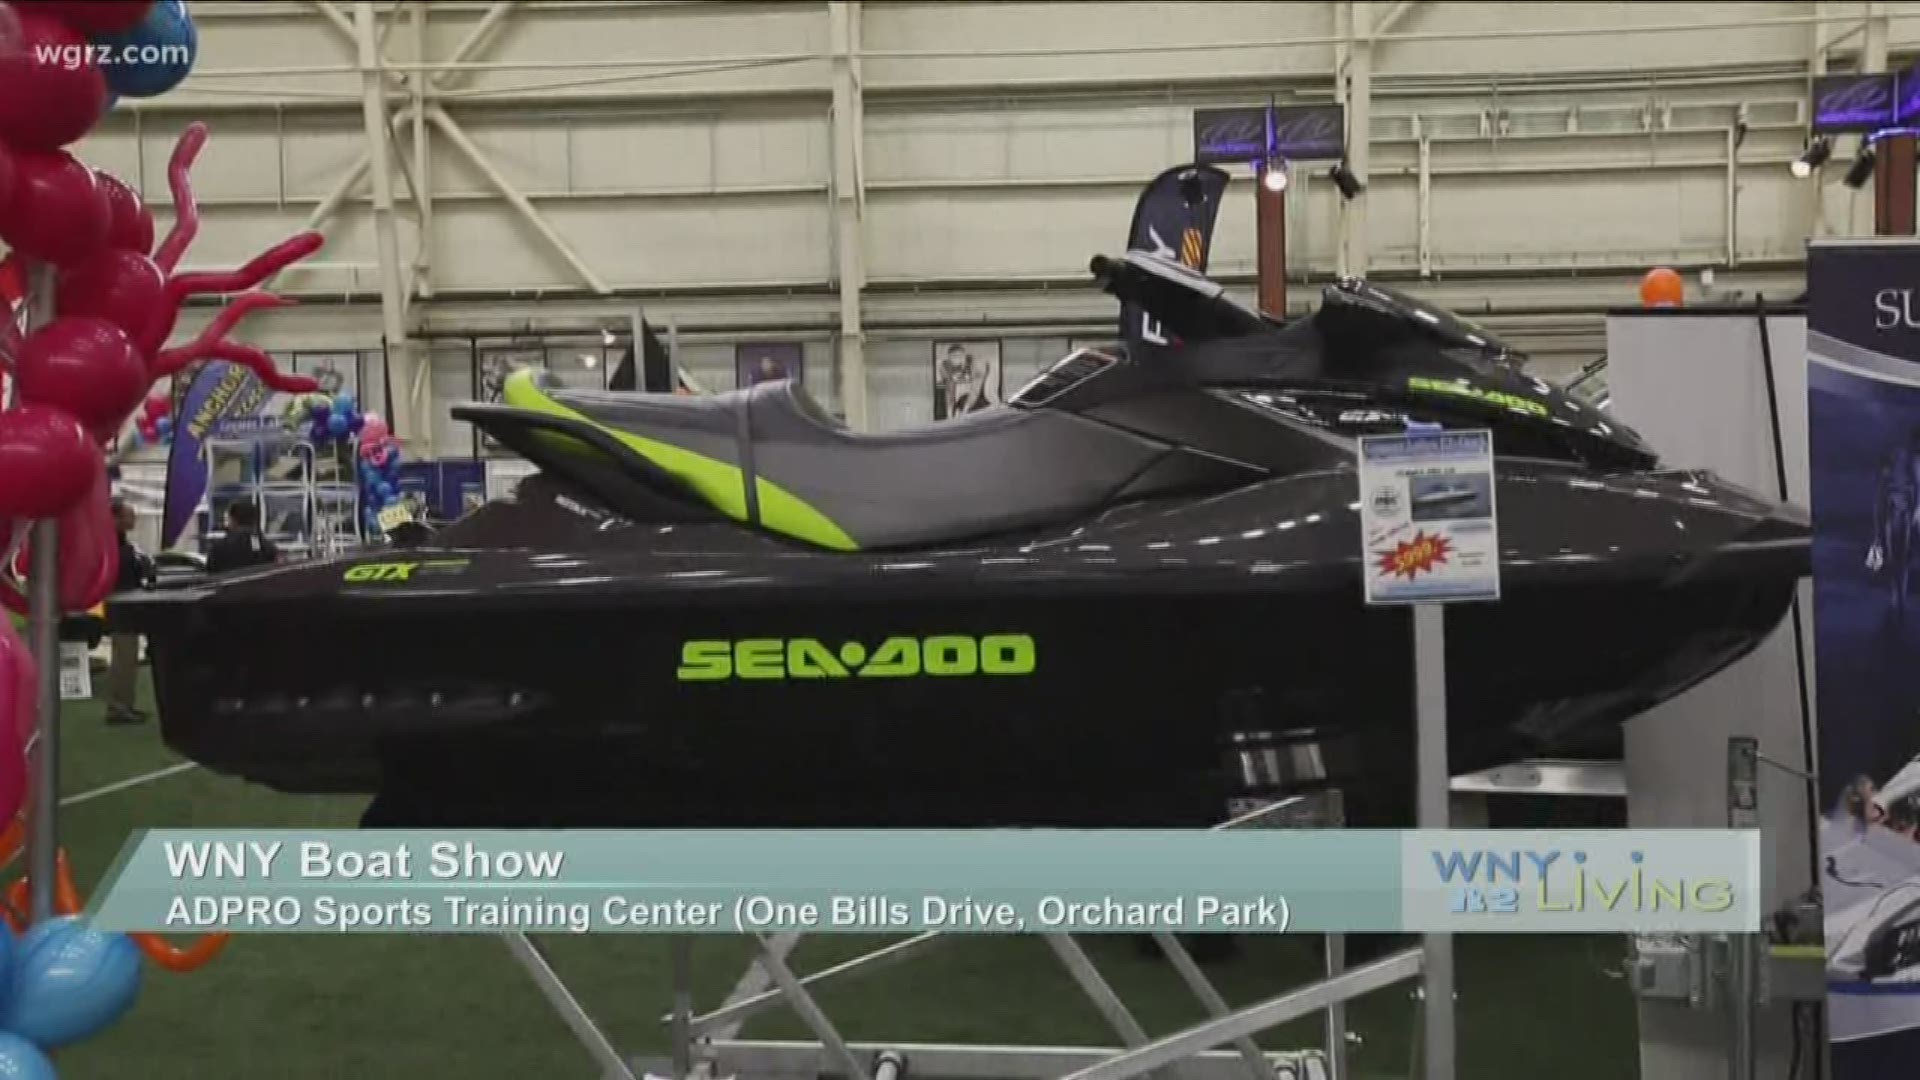 February 22 - WNY Boat Show (THIS VIDEO IS SPONSORED BY WNY BOAT SHOW)